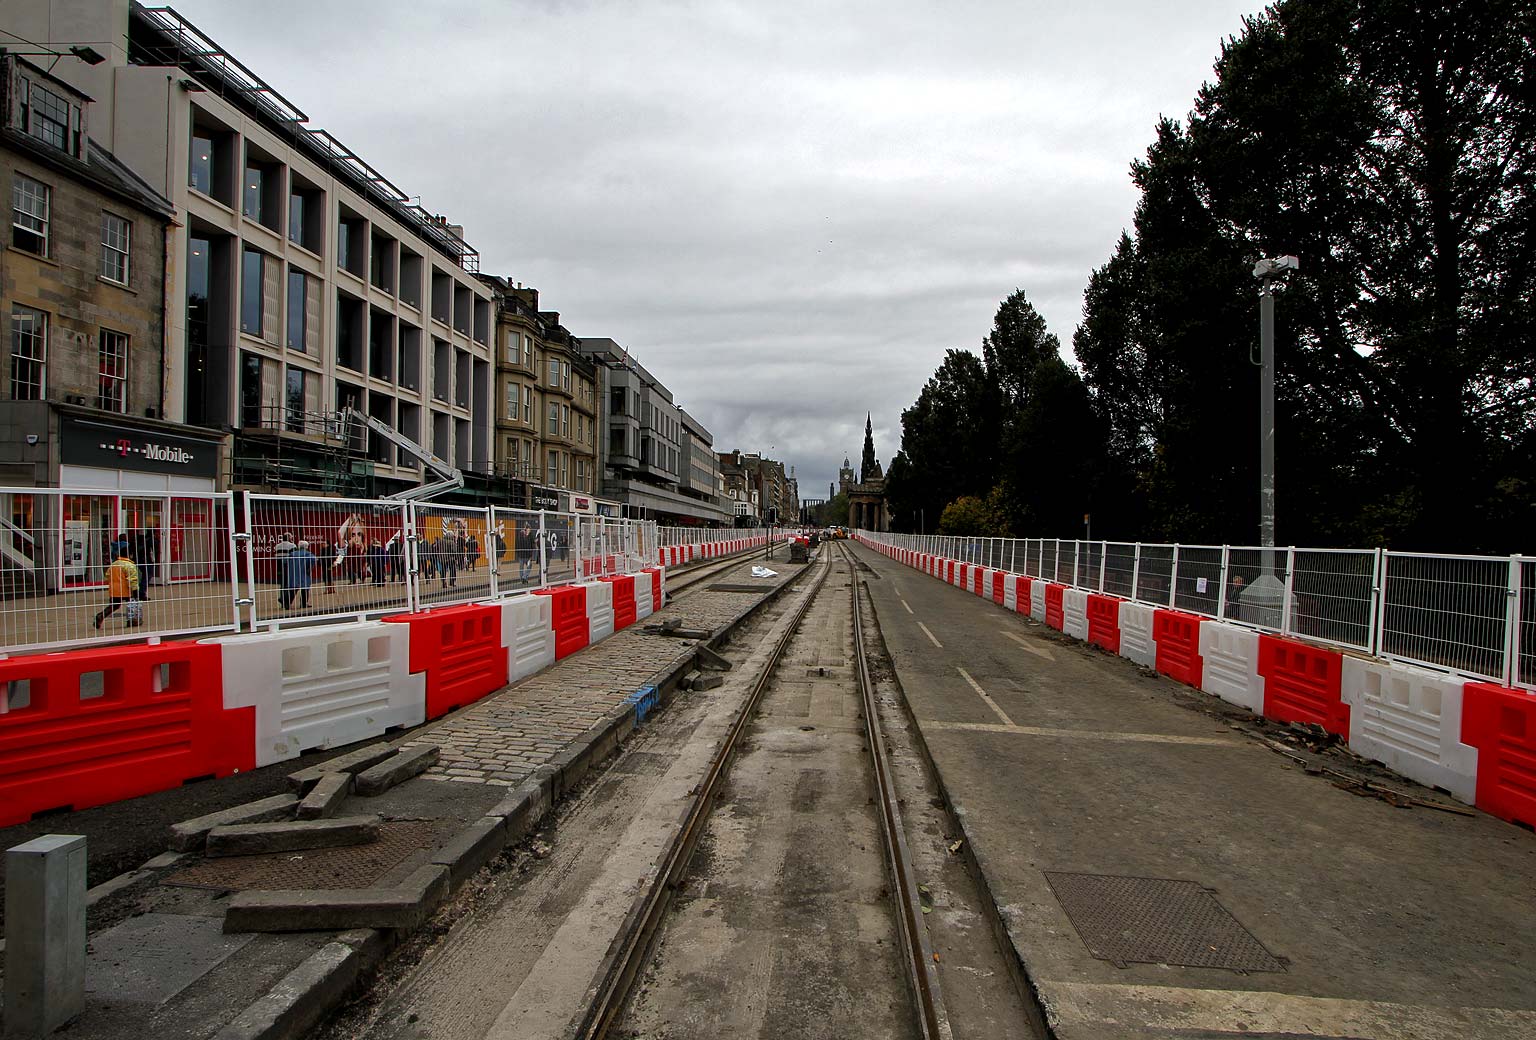 Tram works -  Princes Street  -  View from near Frederick Street  -   October 2011